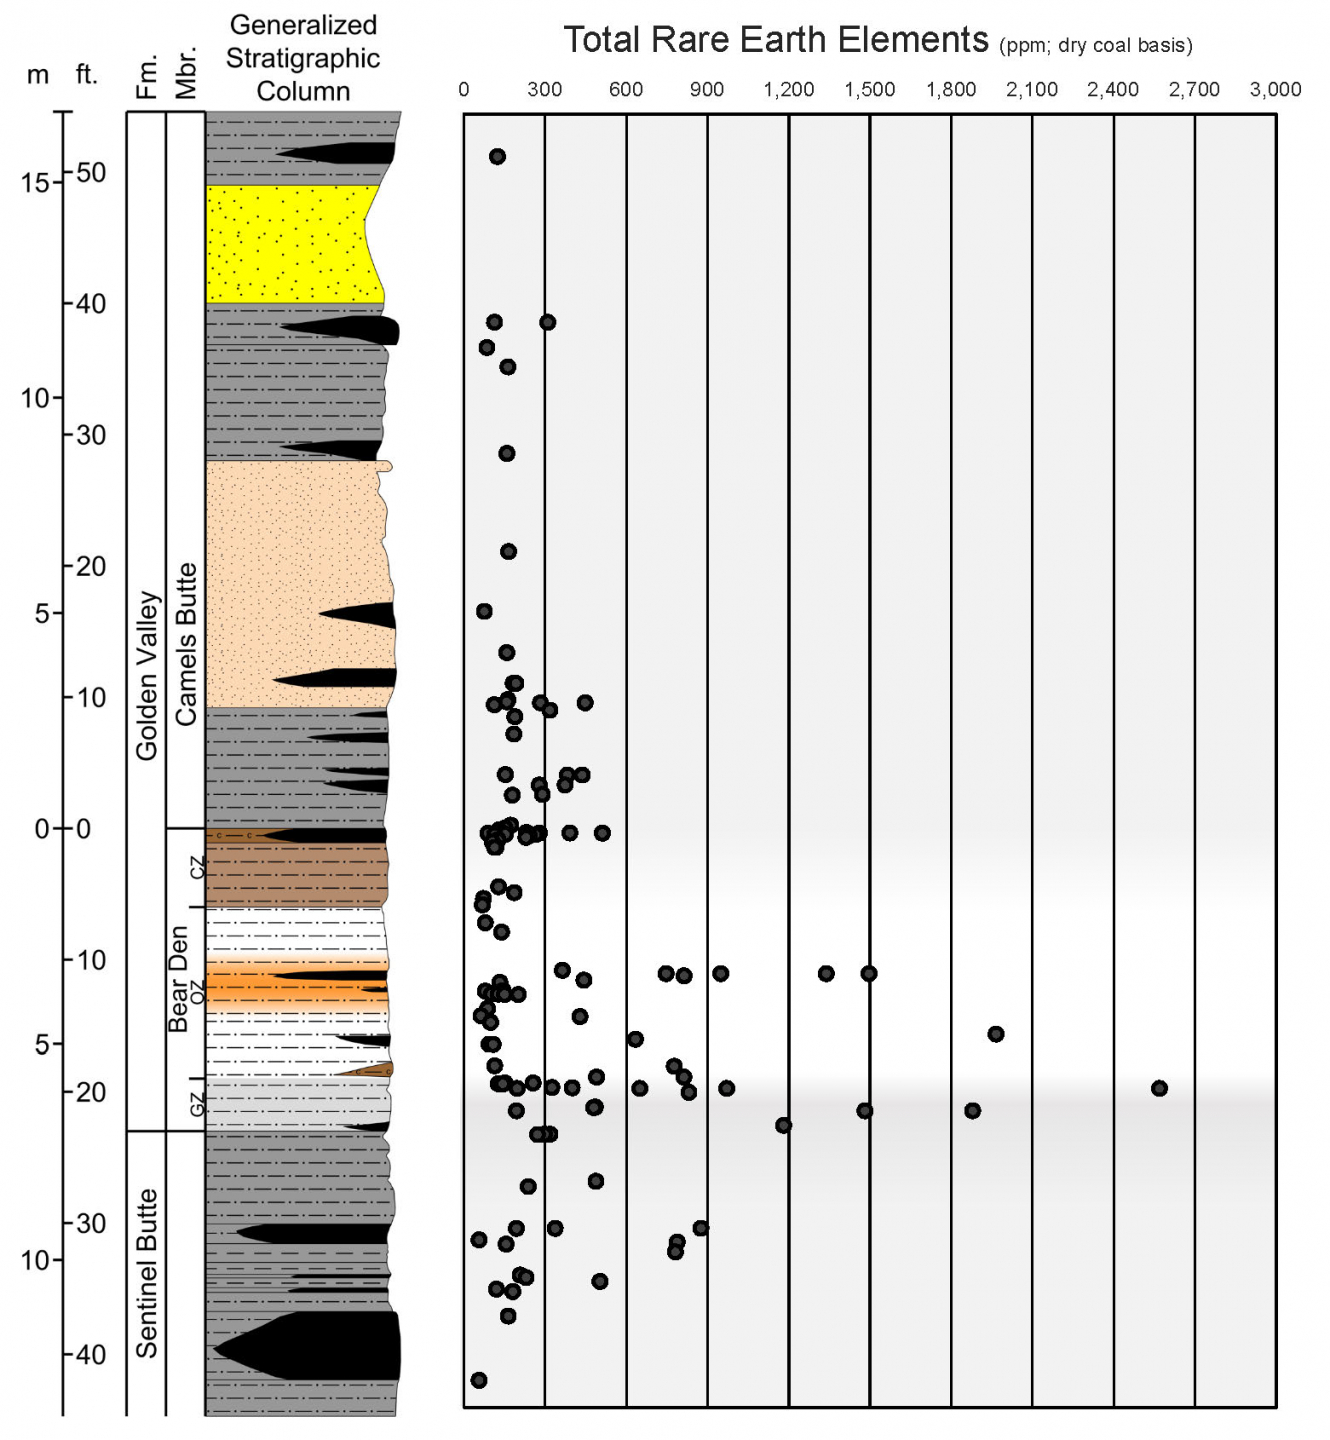 A stratigraphic profile of rare earth element concentrations for the 122 rock samples for the NDGS critical mineral study. The rock colors are reflected in the profile.